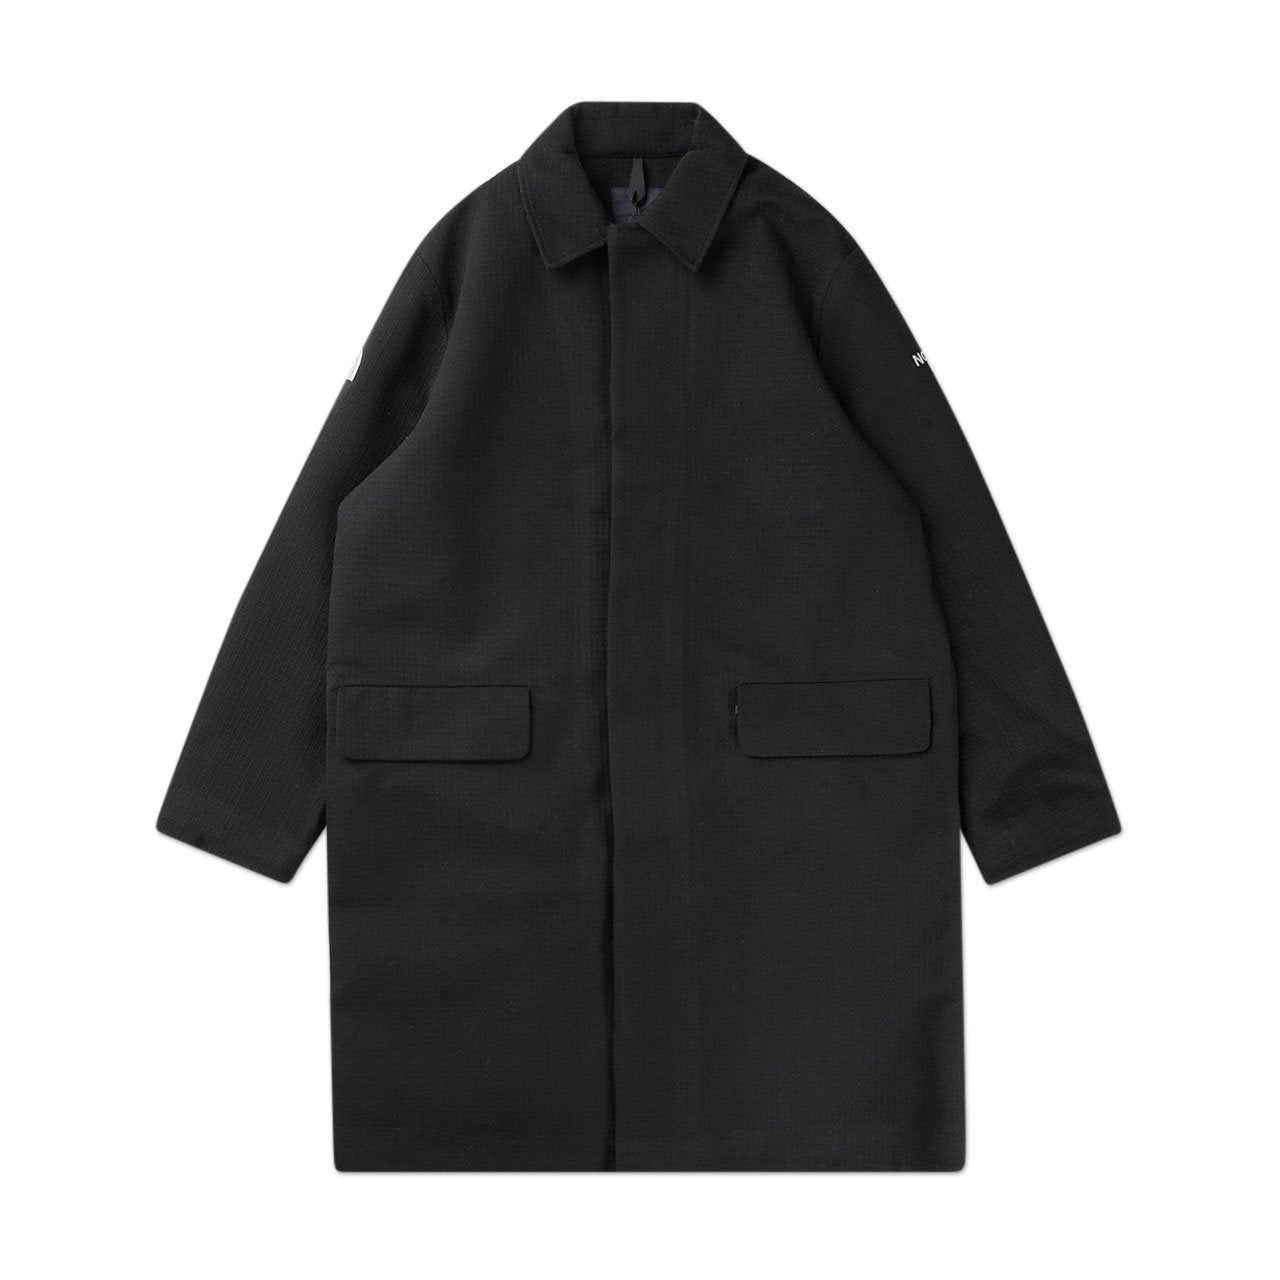 the north face black series tailor jacket (black) - nf0a4qxyjk3 - a.plus - Image - 1